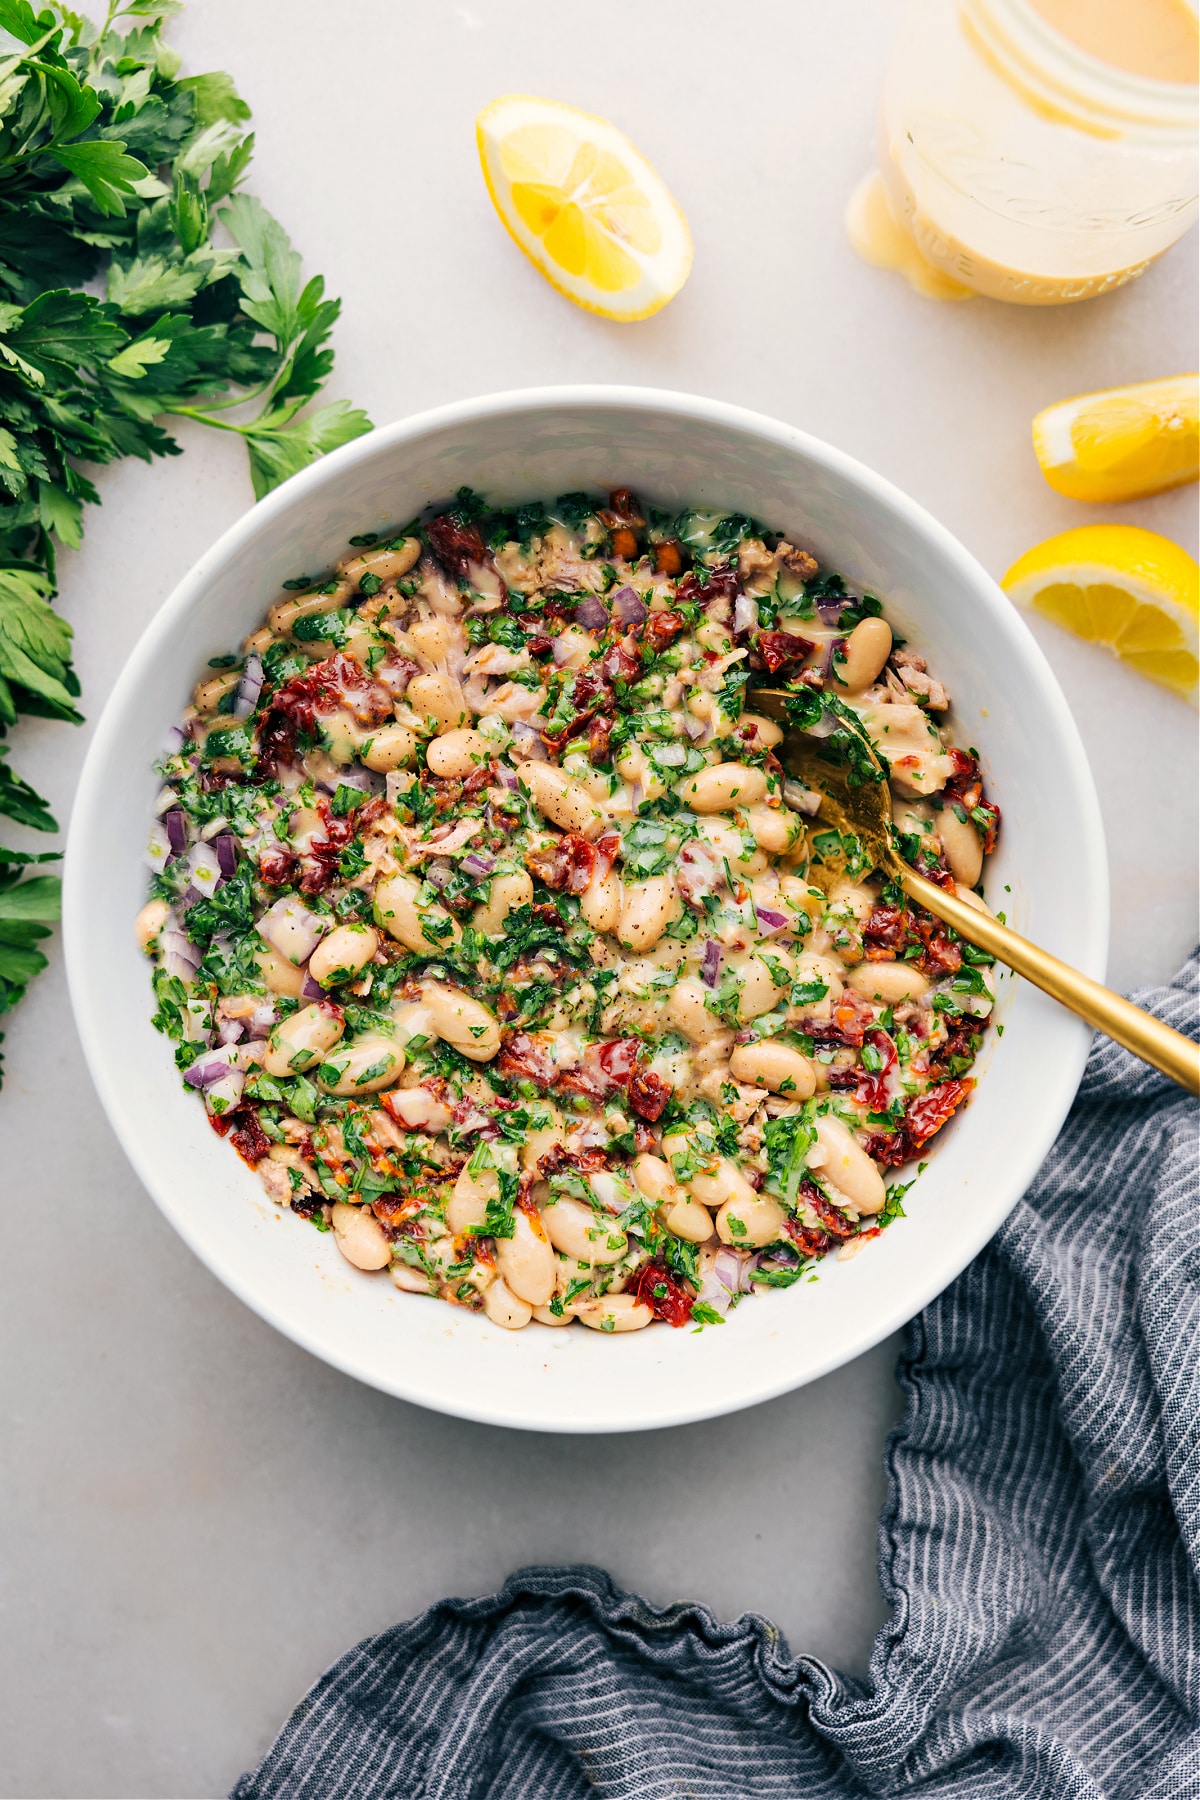 Tuna-White Bean Salad in a bowl ready to be served and enjoyed.